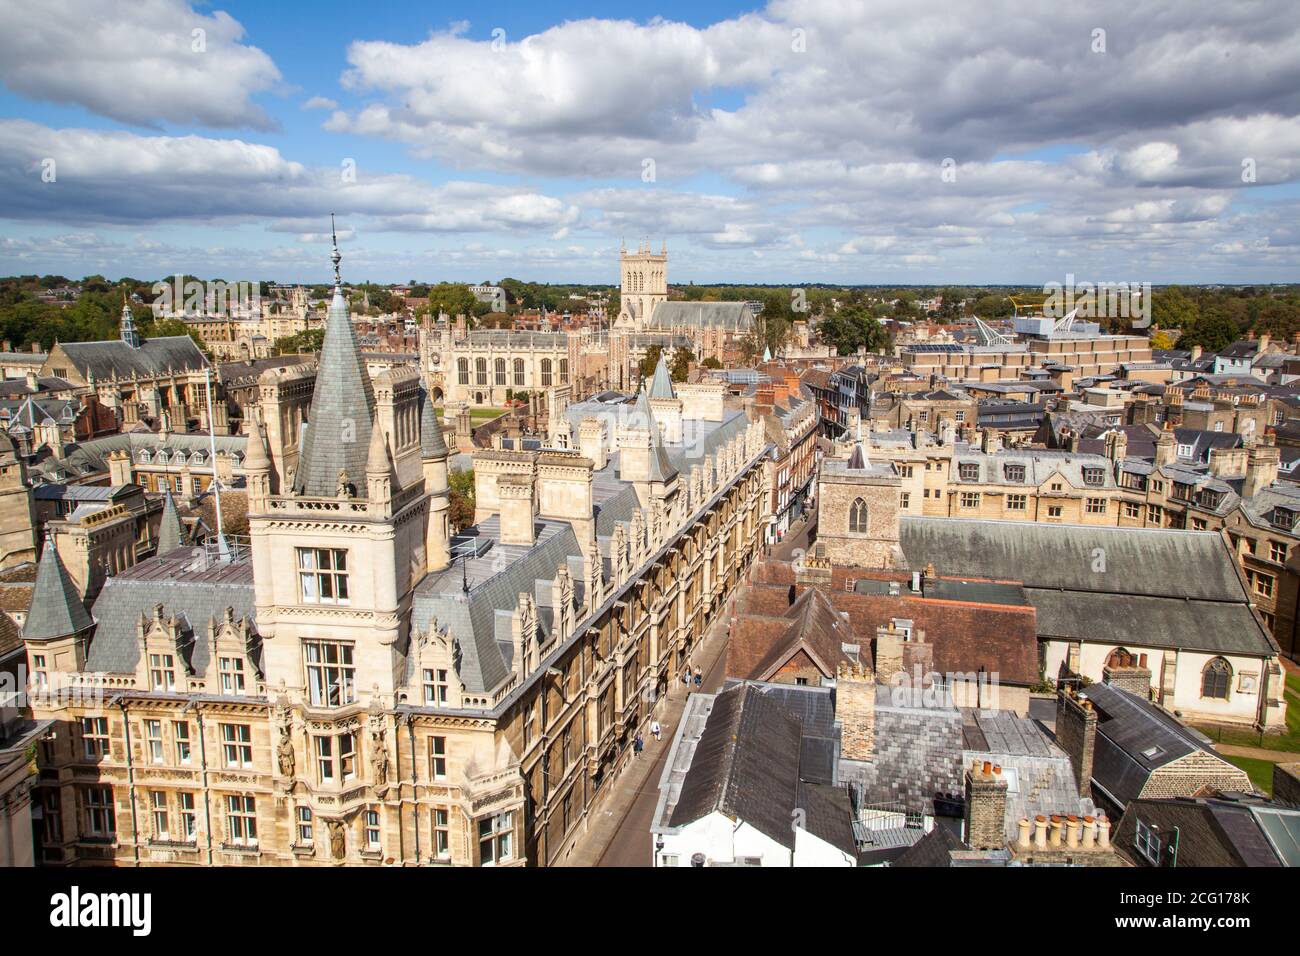 Aerial view from above of the historic collages churches and  university buildings in the city of Cambridge, taken from the tower of St Mary;s Church Stock Photo